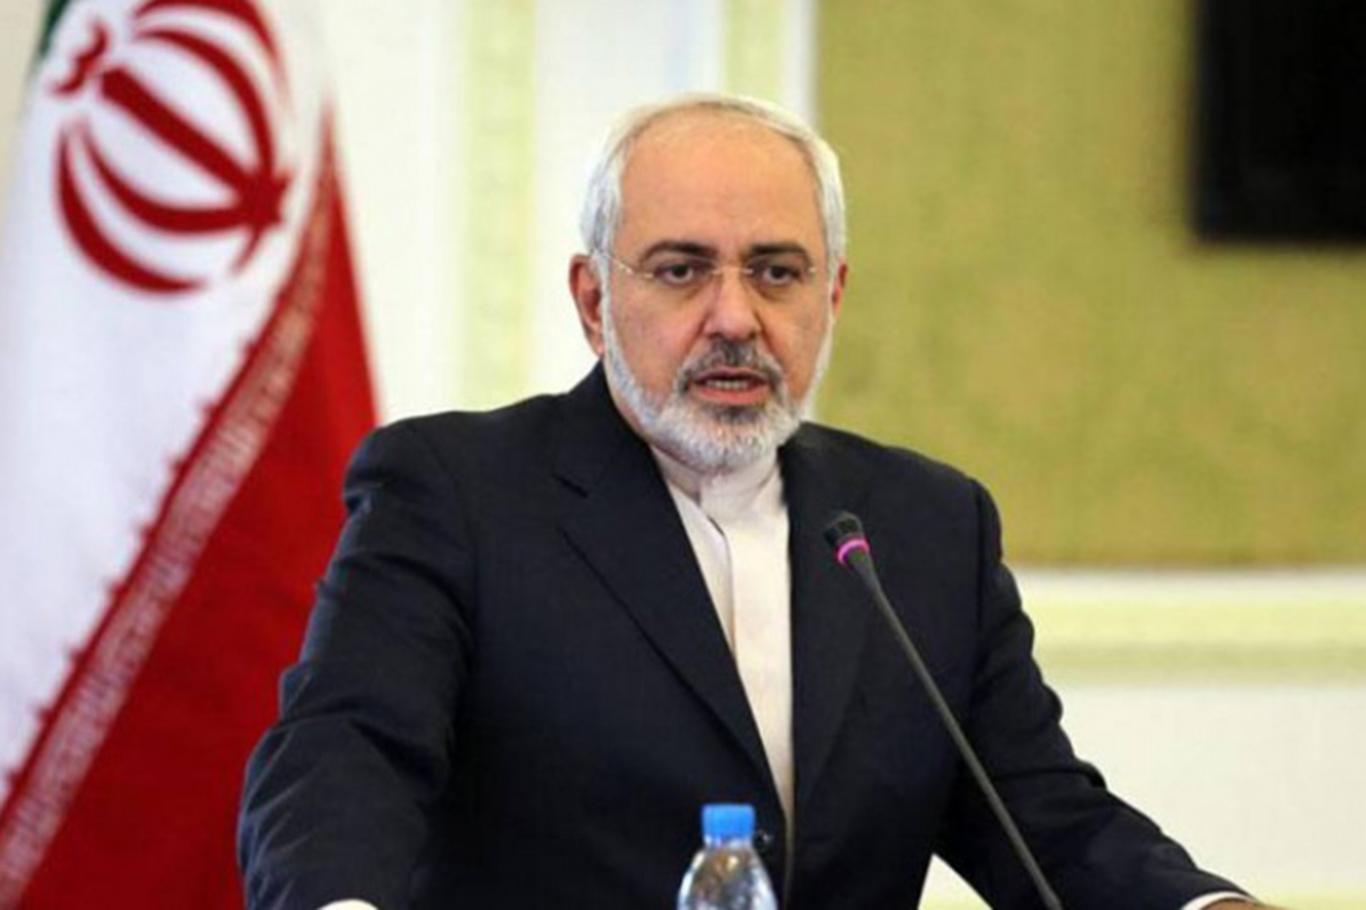 Zarif: One wonders whether Pompeo is Sec of State or Secretary of Hate.